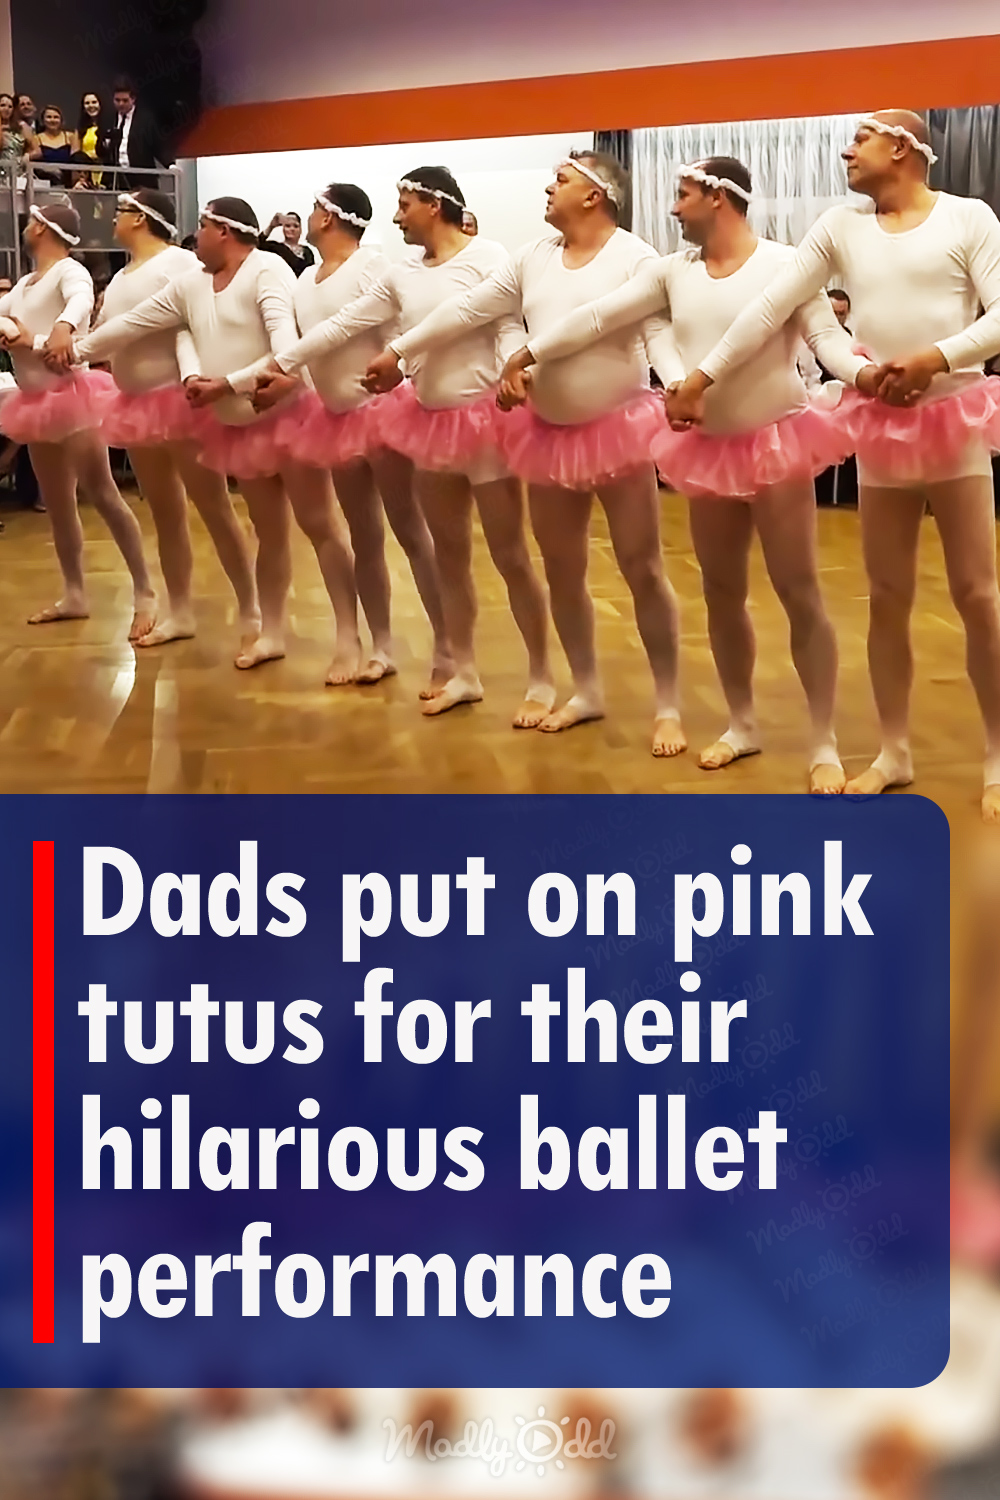 Dads put on pink tutus for their hilarious ballet performance